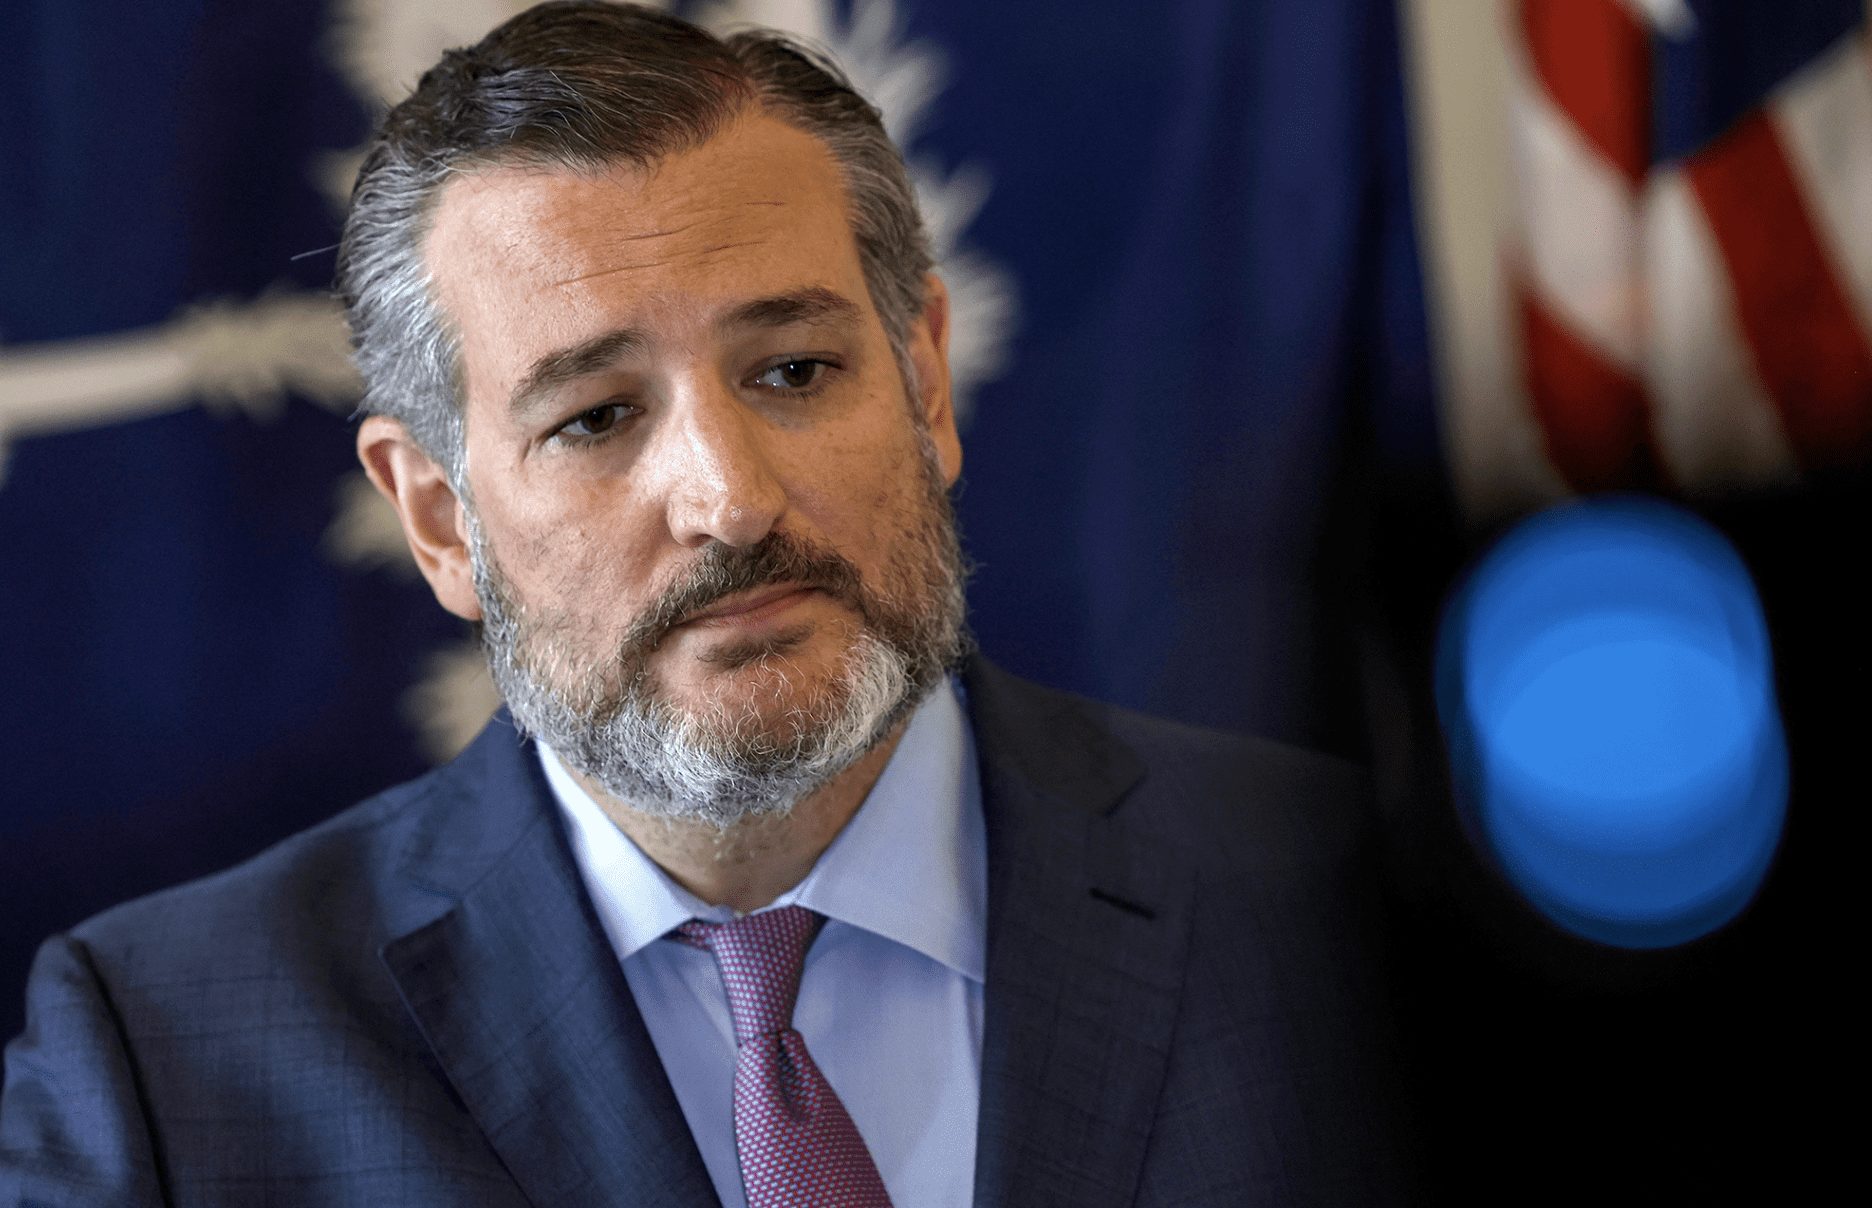 Sen. Cruz Claims AG Garland 'Refuses' to Protect Supreme Court Justices